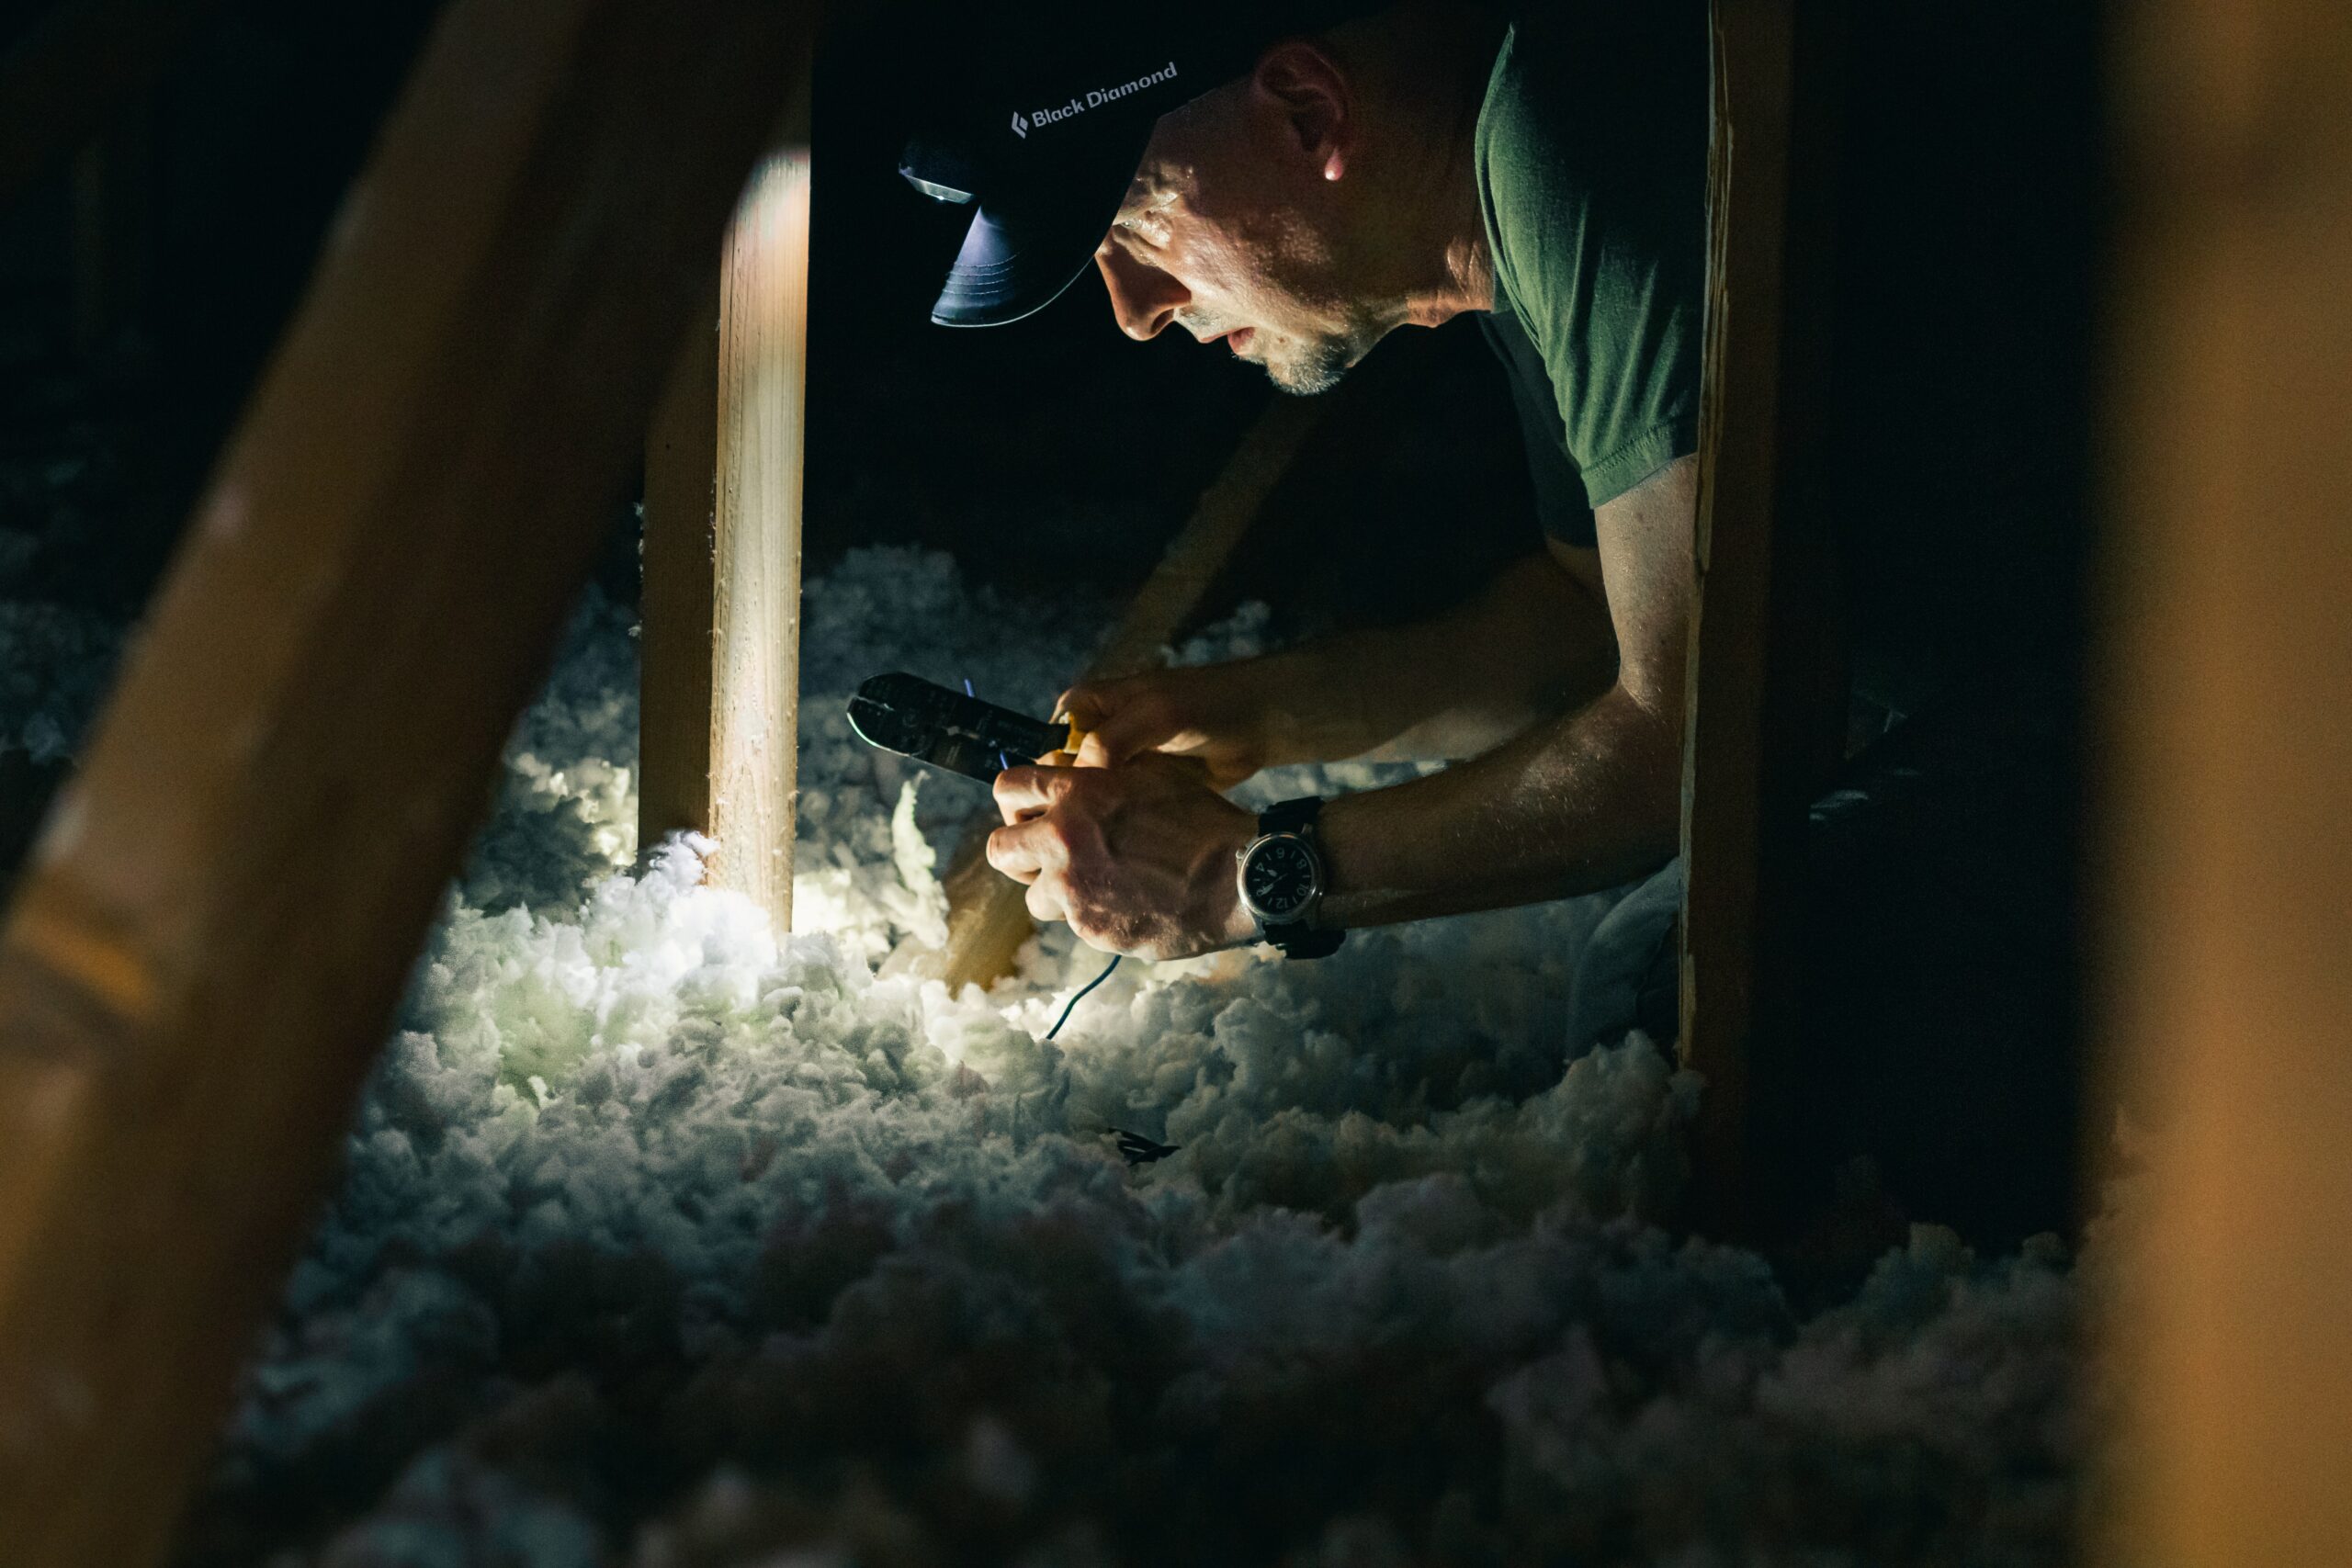 A man inspects the depth of attic insulation